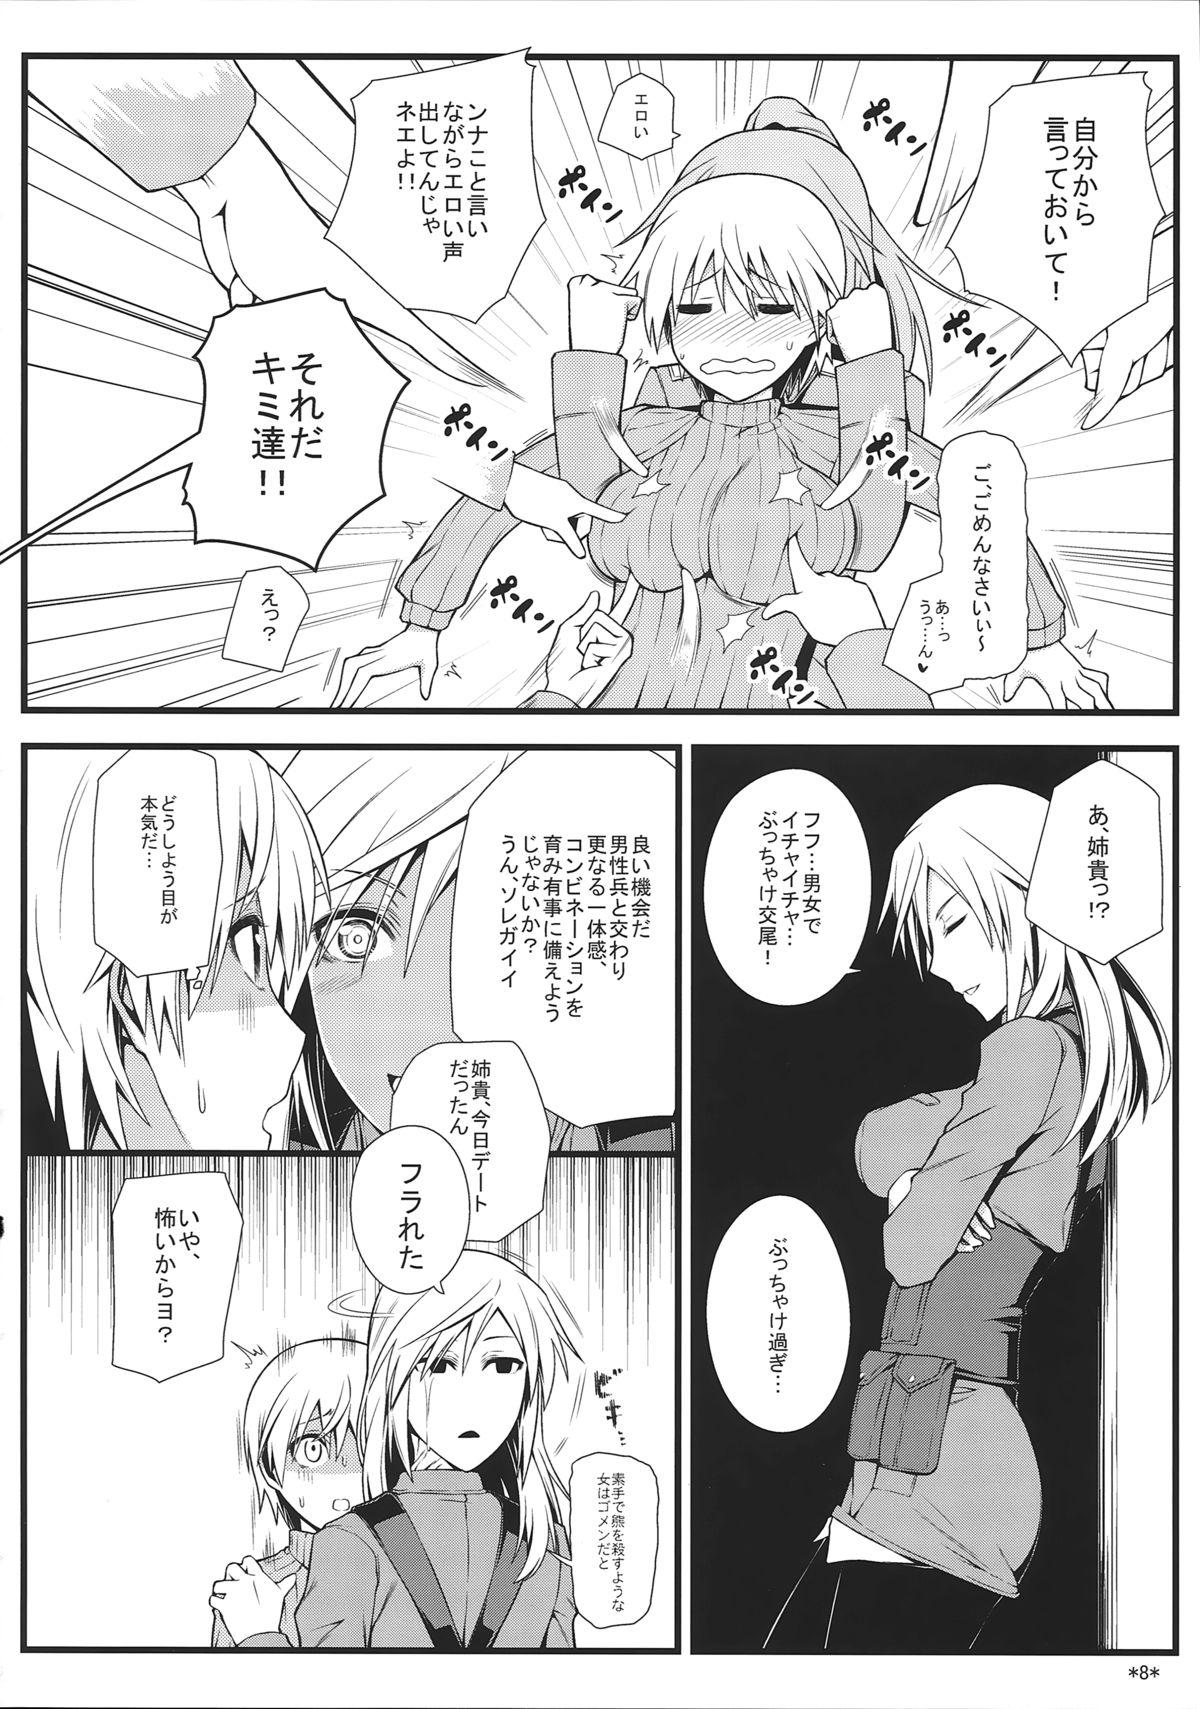 Uncensored KARLSLAND SYNDROME 3 - Strike witches Joven - Page 10